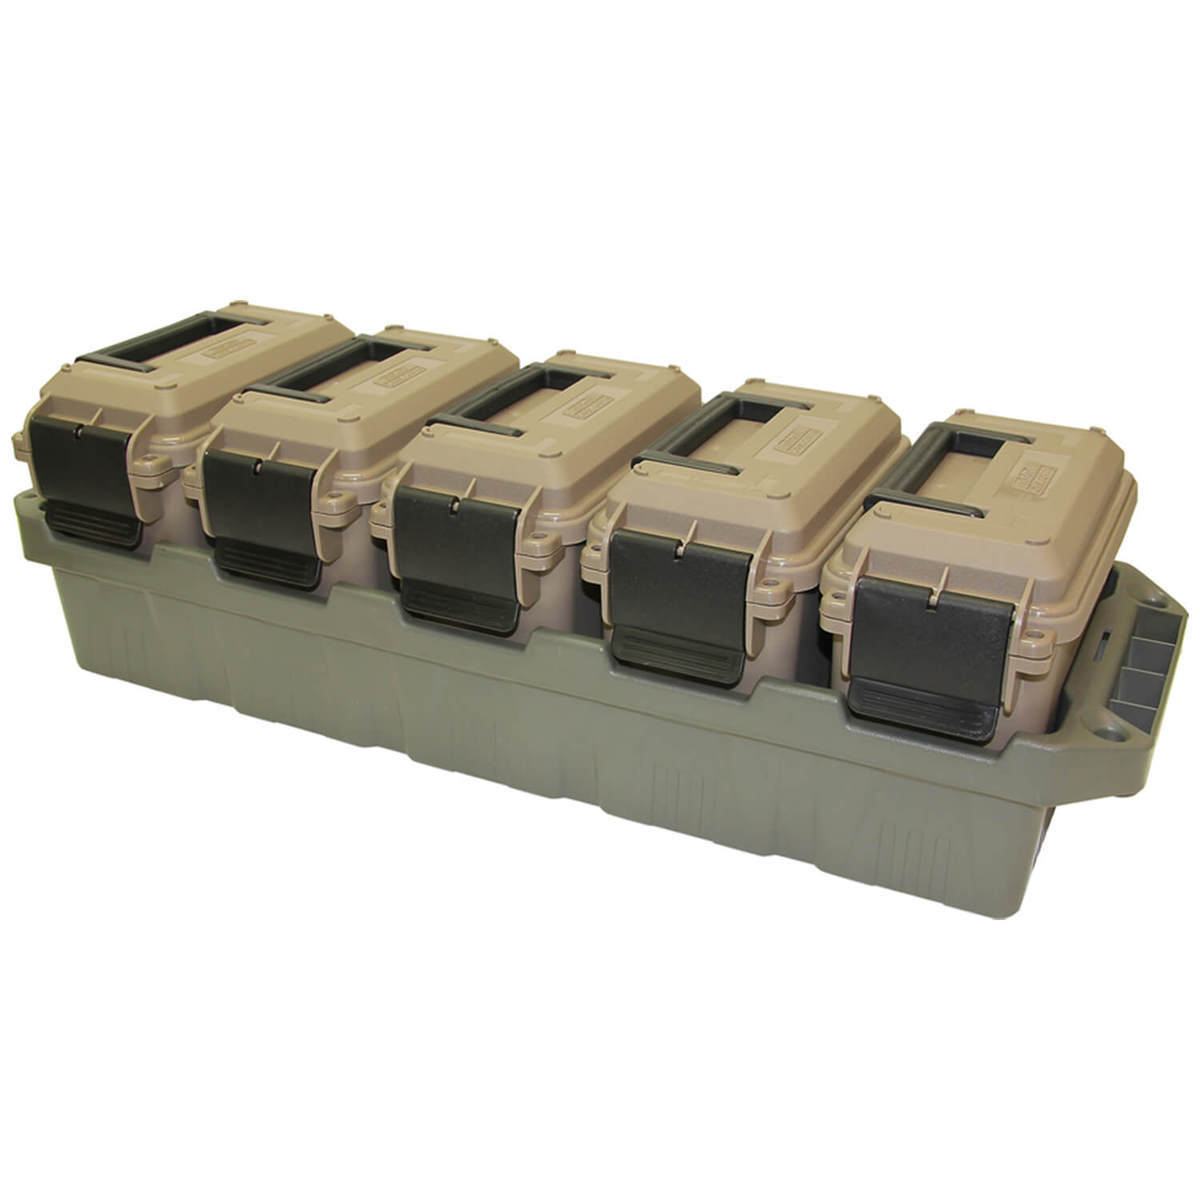  Plano Ammo Boxes, 2-Pack : Sports & Outdoors